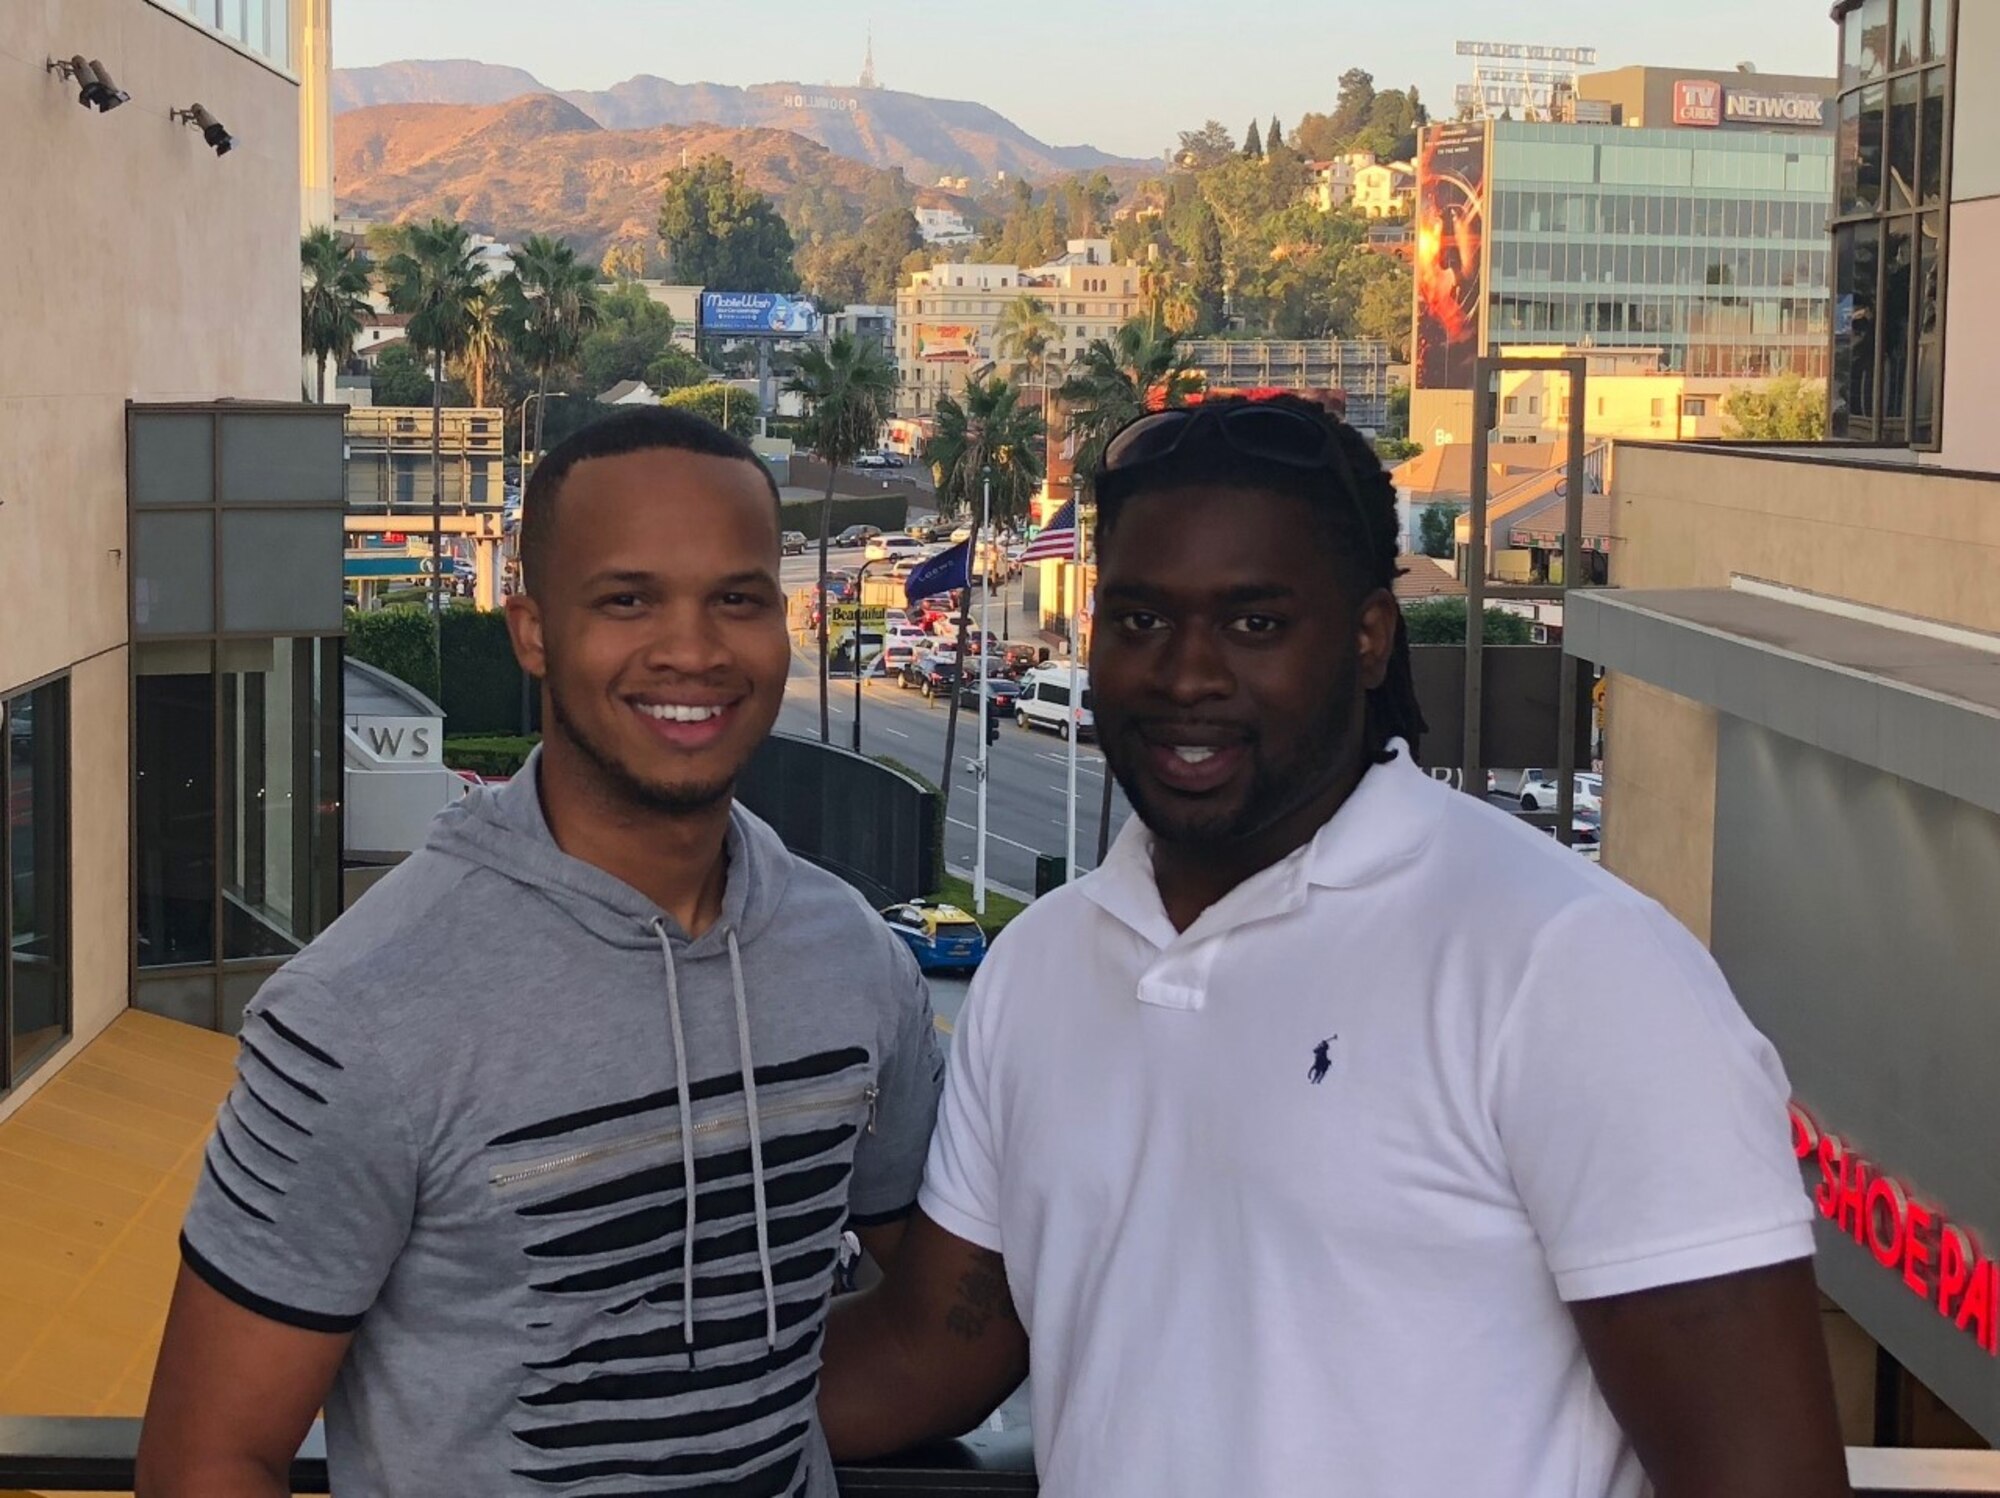 Mario and Monte Foreman-Powell pose for a photo together on vacation.